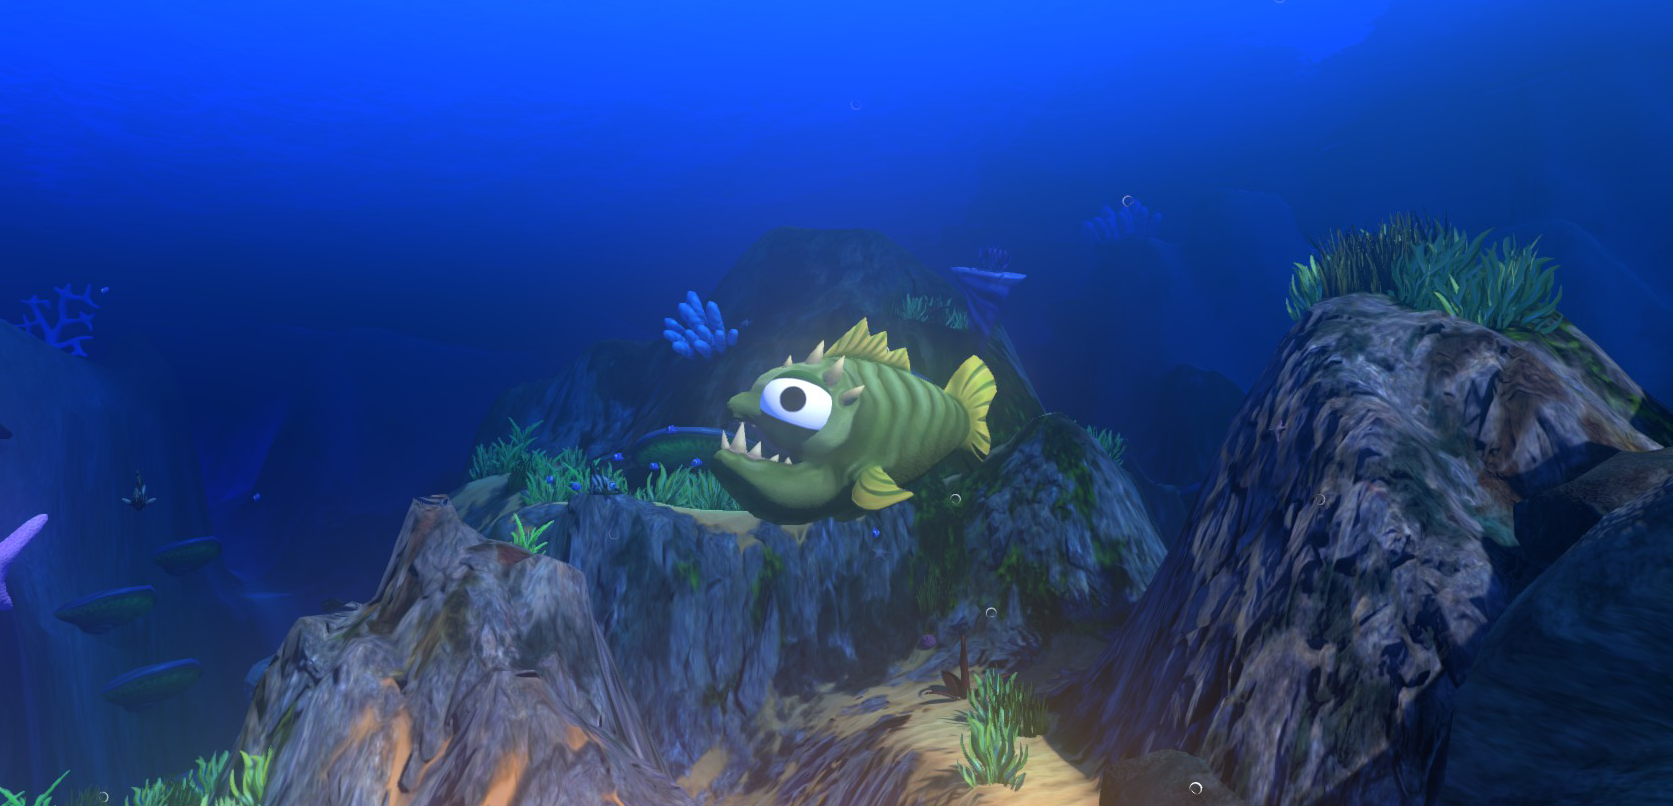 is feed and grow fish on xbox one